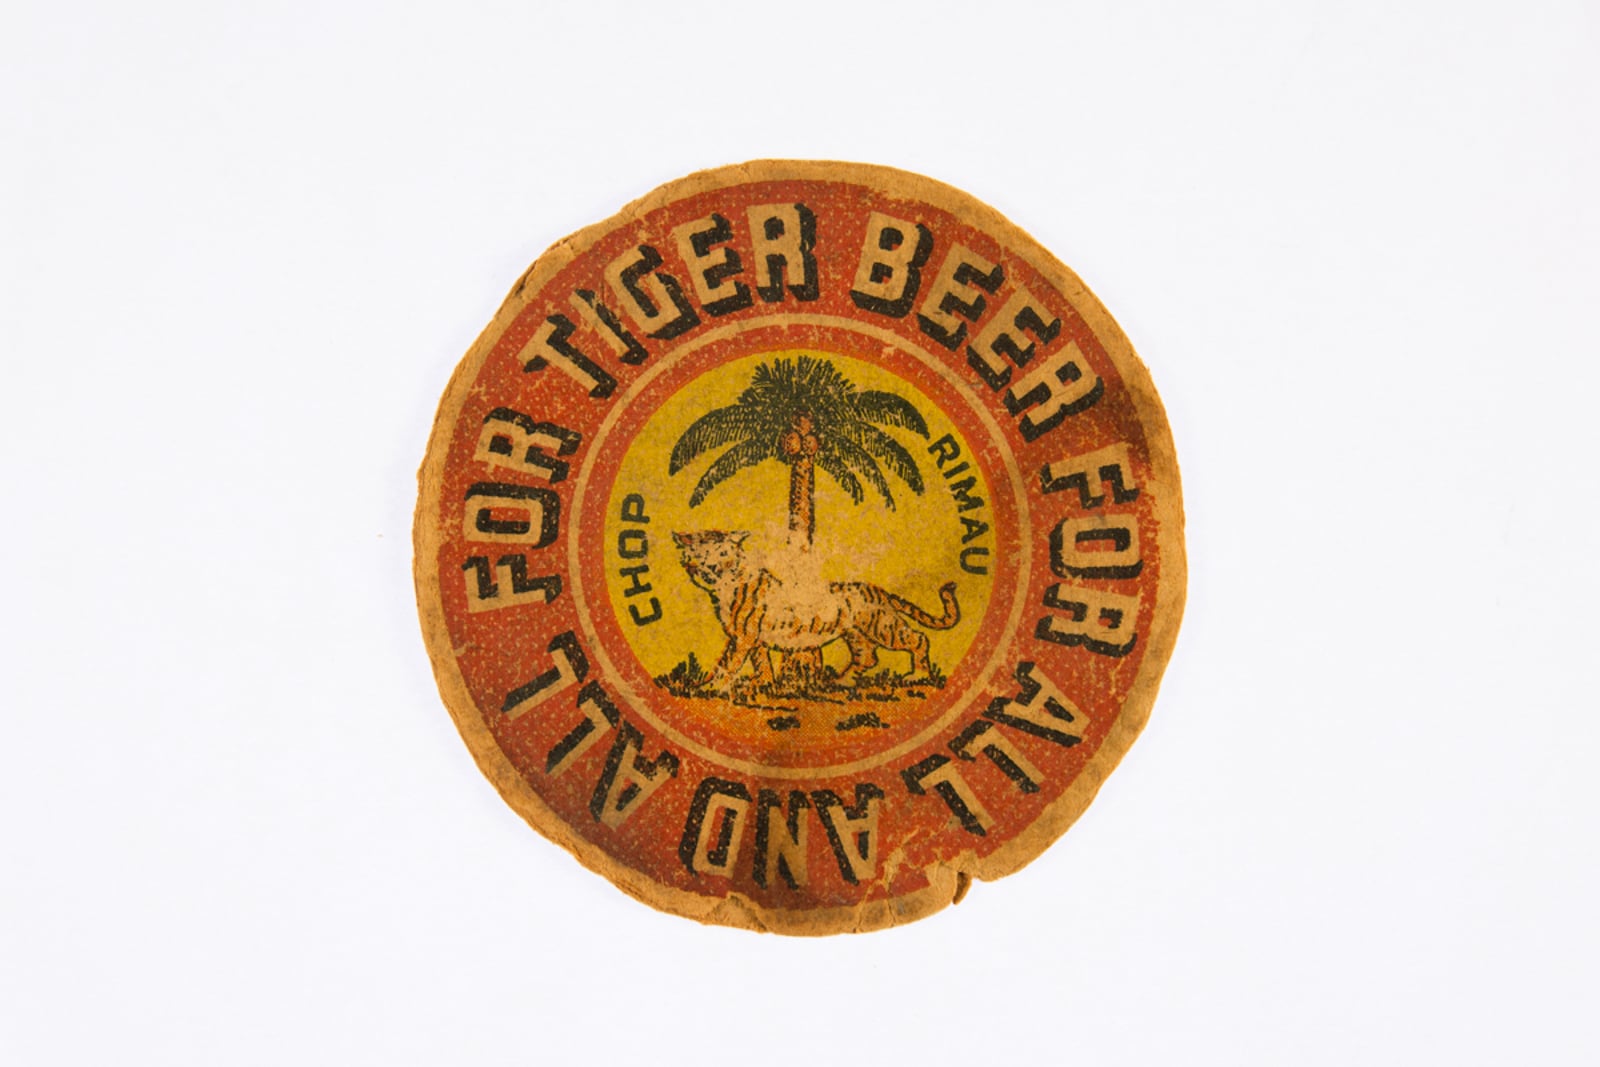 "Tiger Beer For All And All For" Fraser & Neave Circular Vintage Coaster